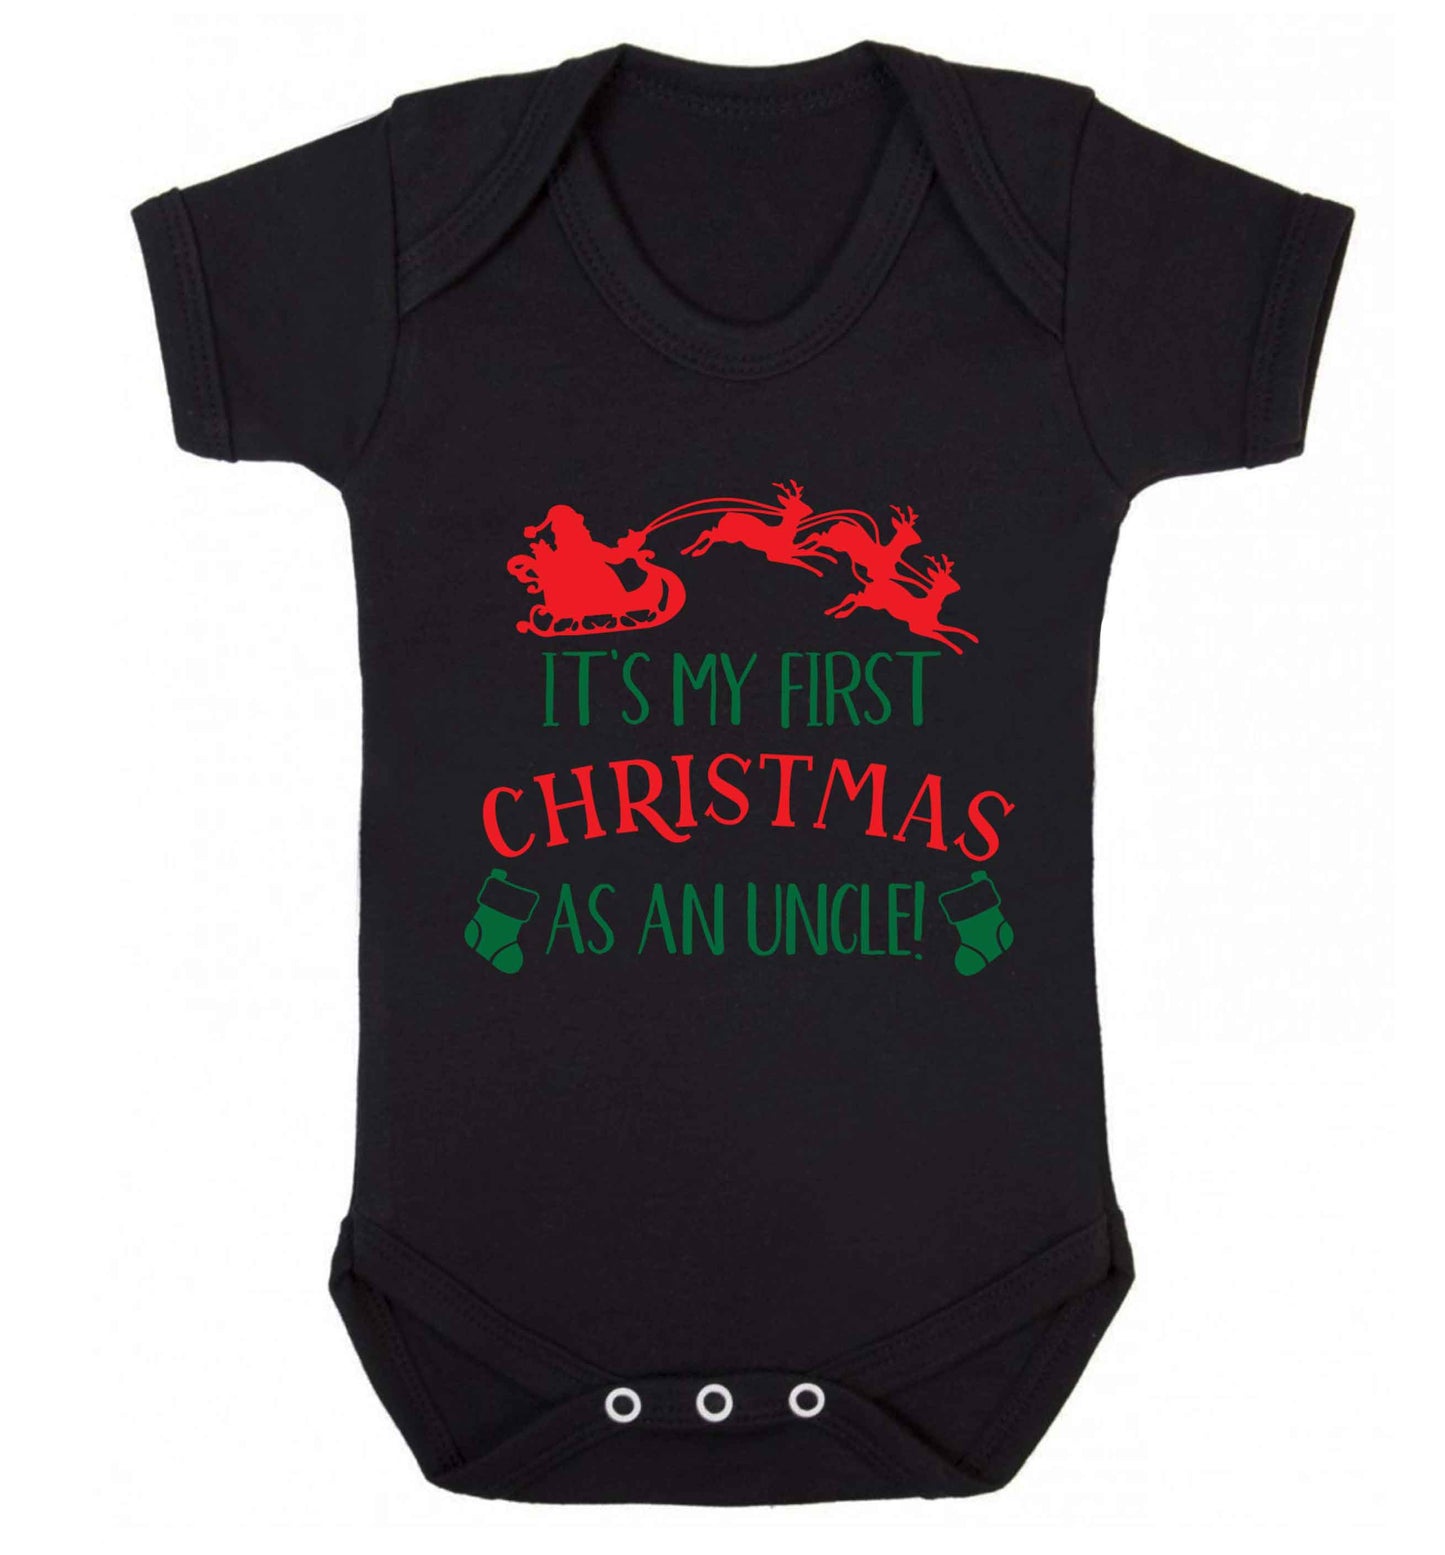 It's my first Christmas as an uncle! Baby Vest black 18-24 months